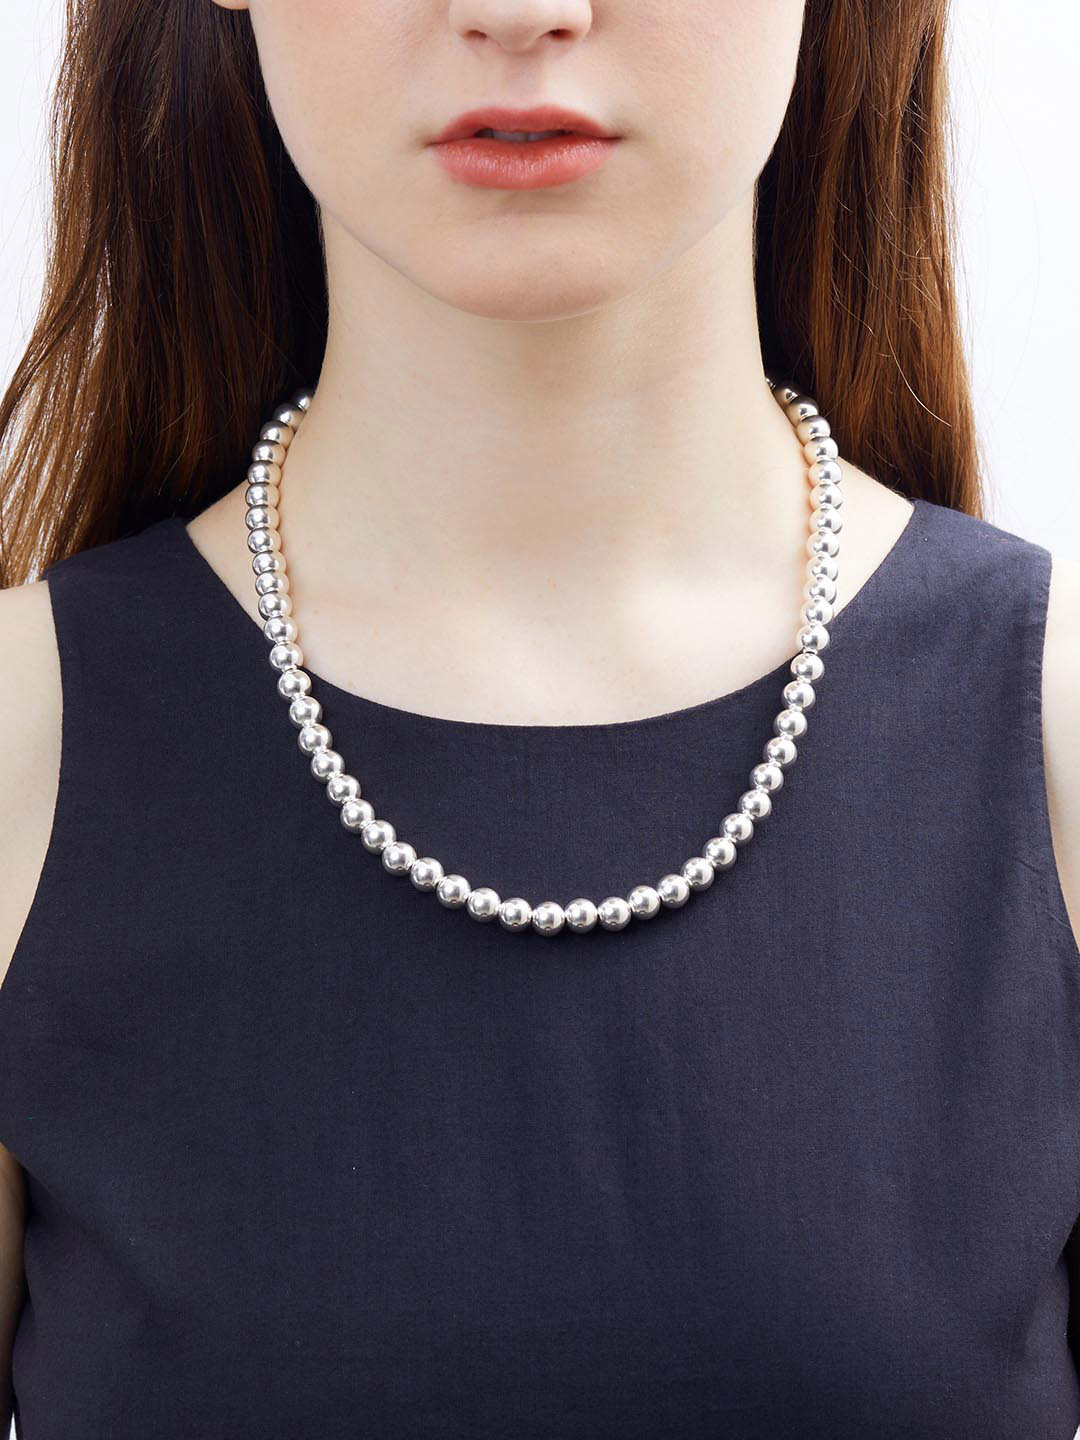 8mm Ball Chain Necklace 50cm - Silver